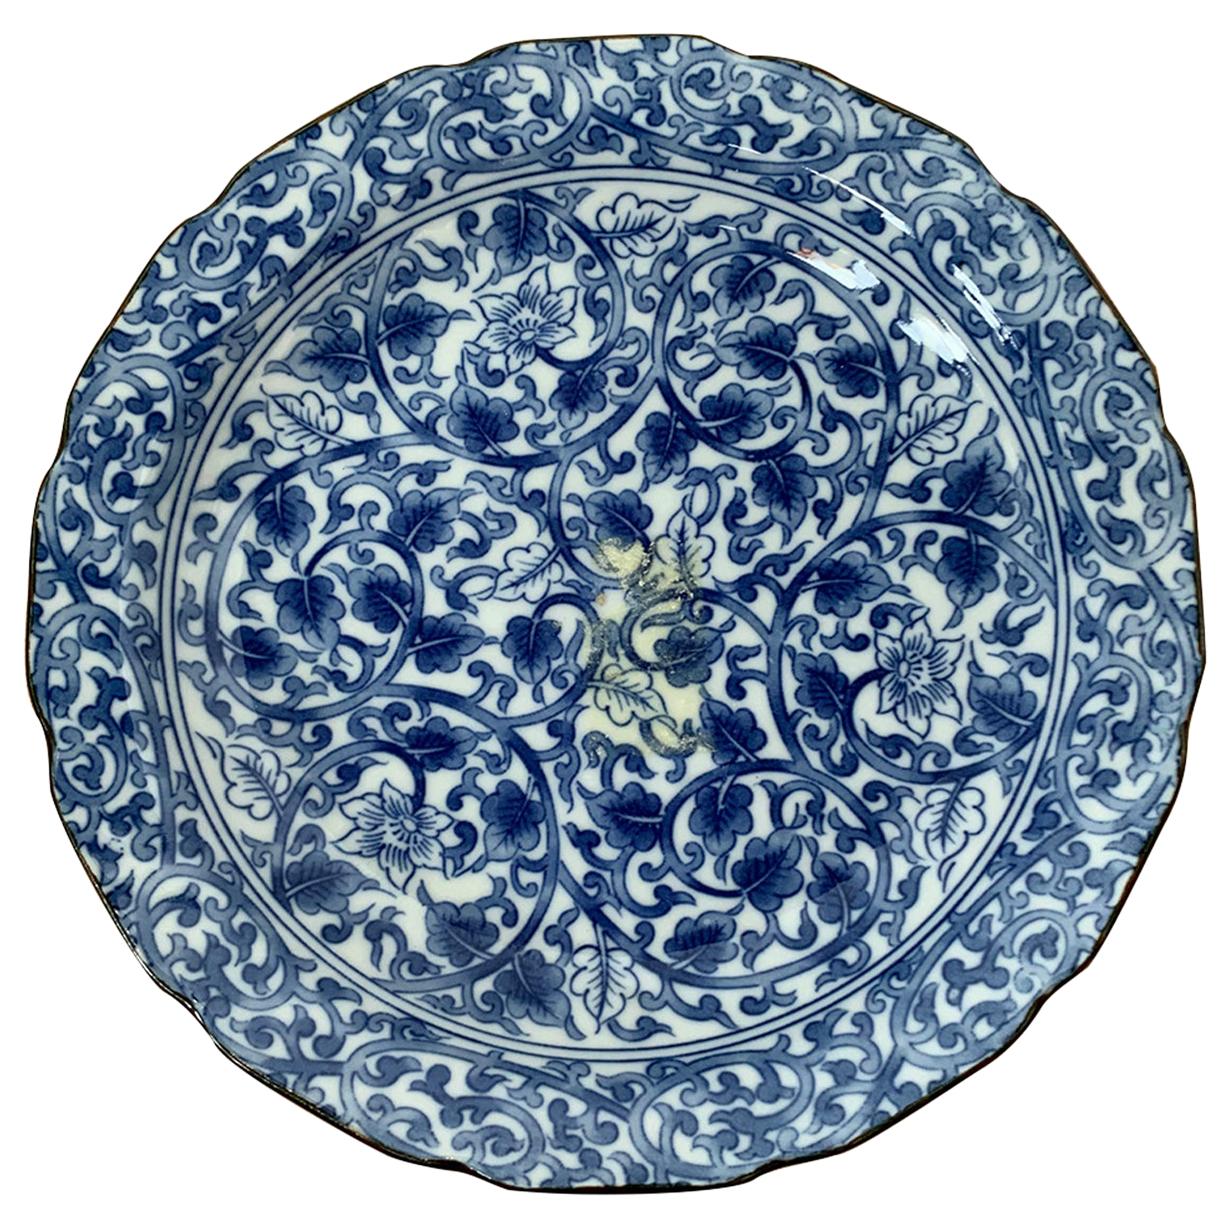 20th Century Chinese Blue and White Porcelain Plate with Vine Motif, Marked